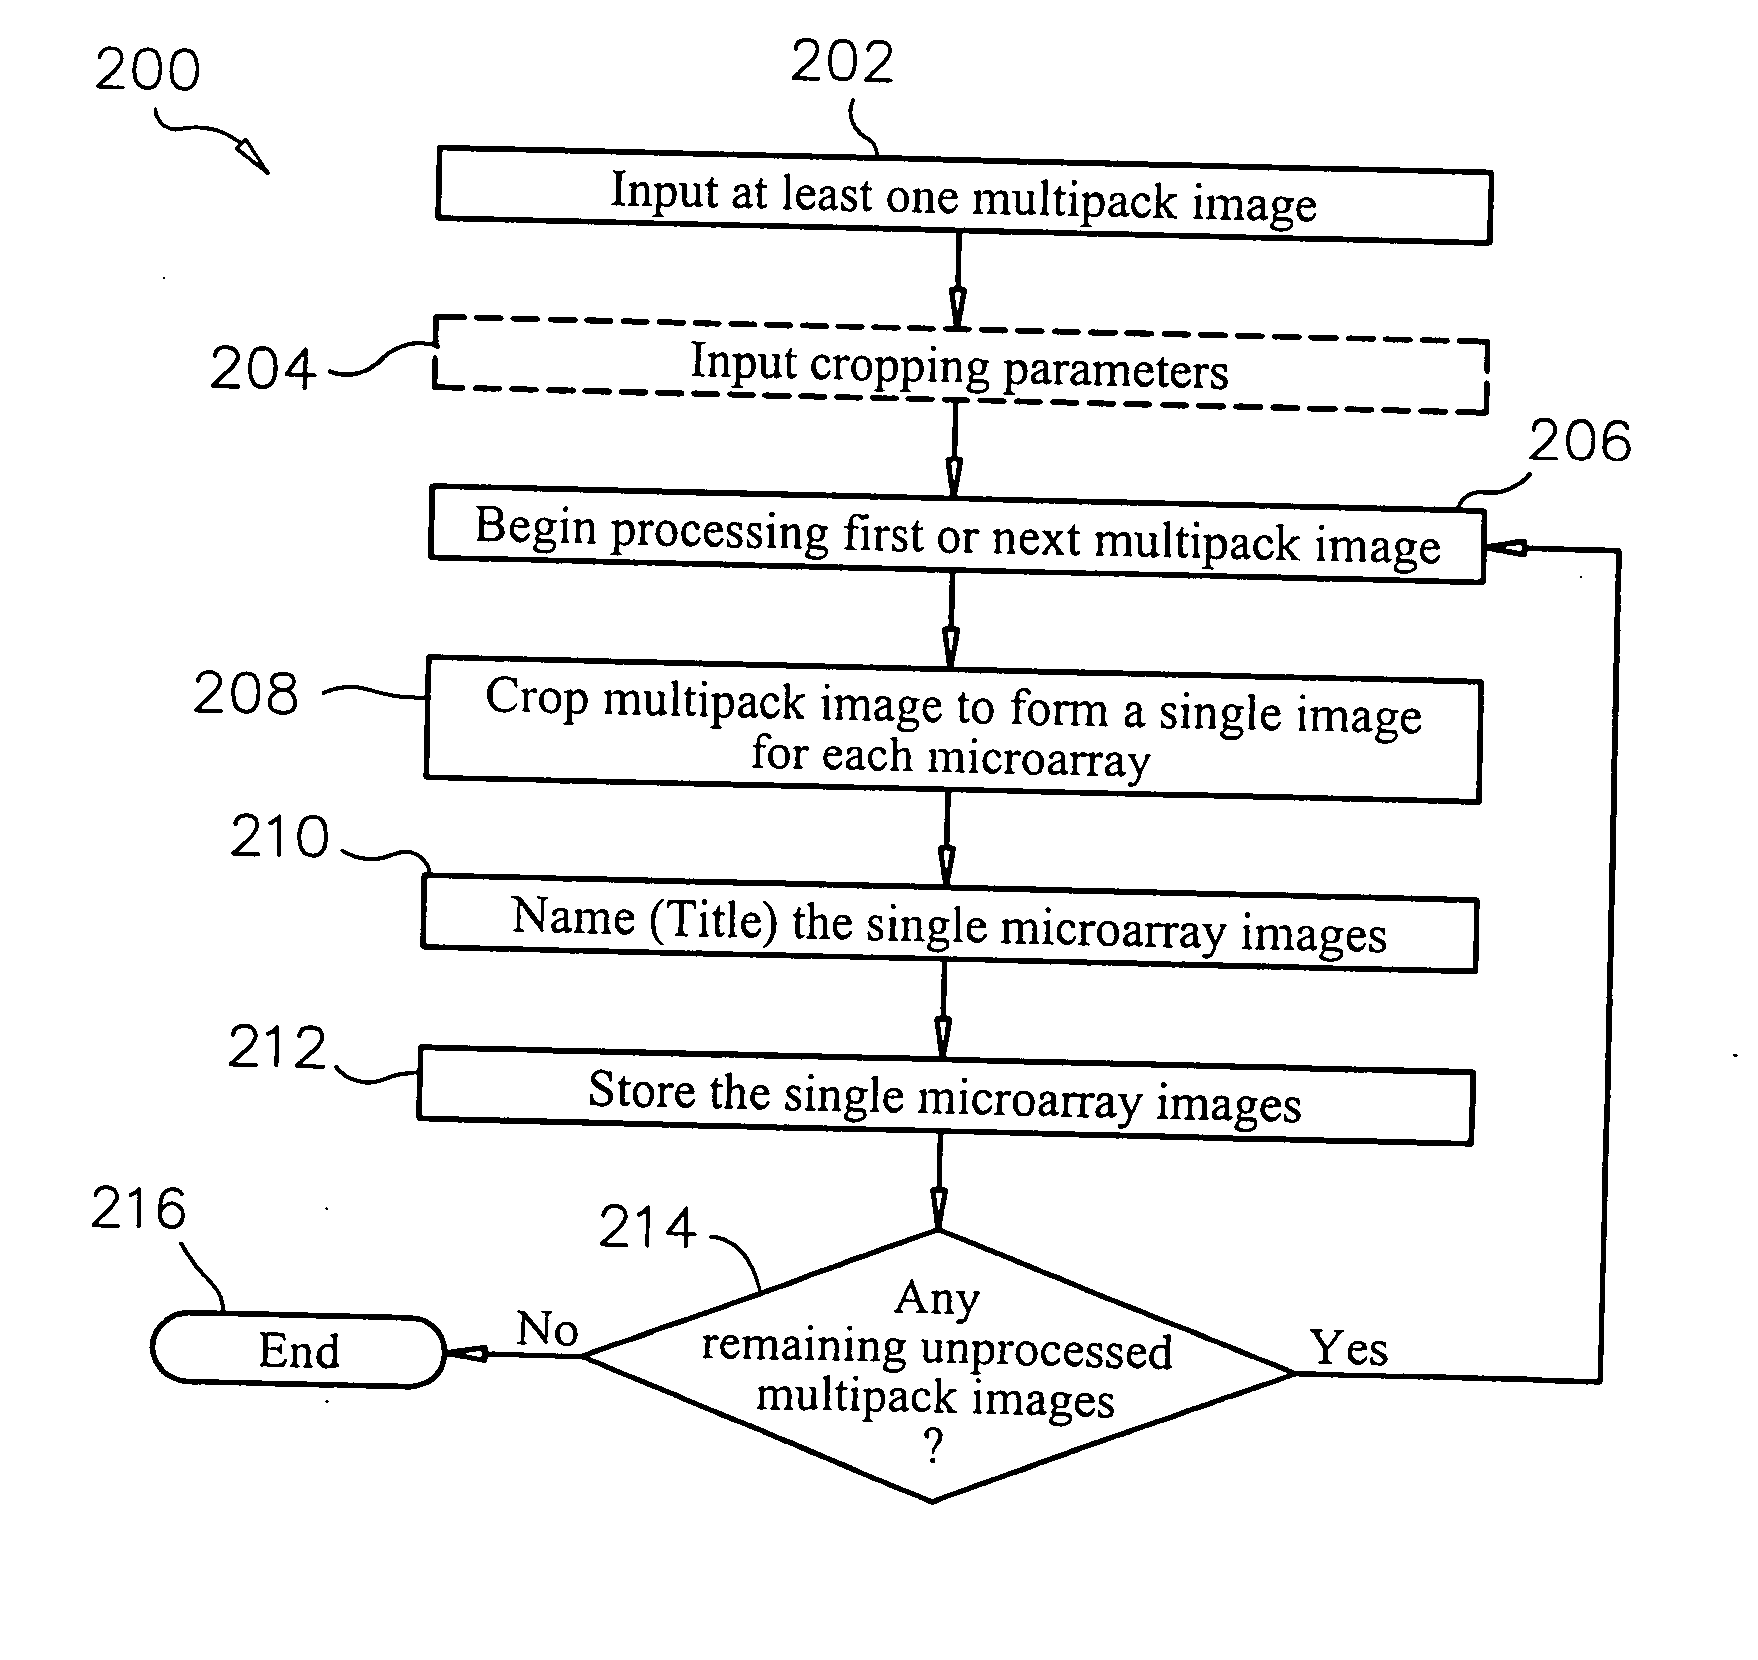 System and method of automated processing of multiple microarray images